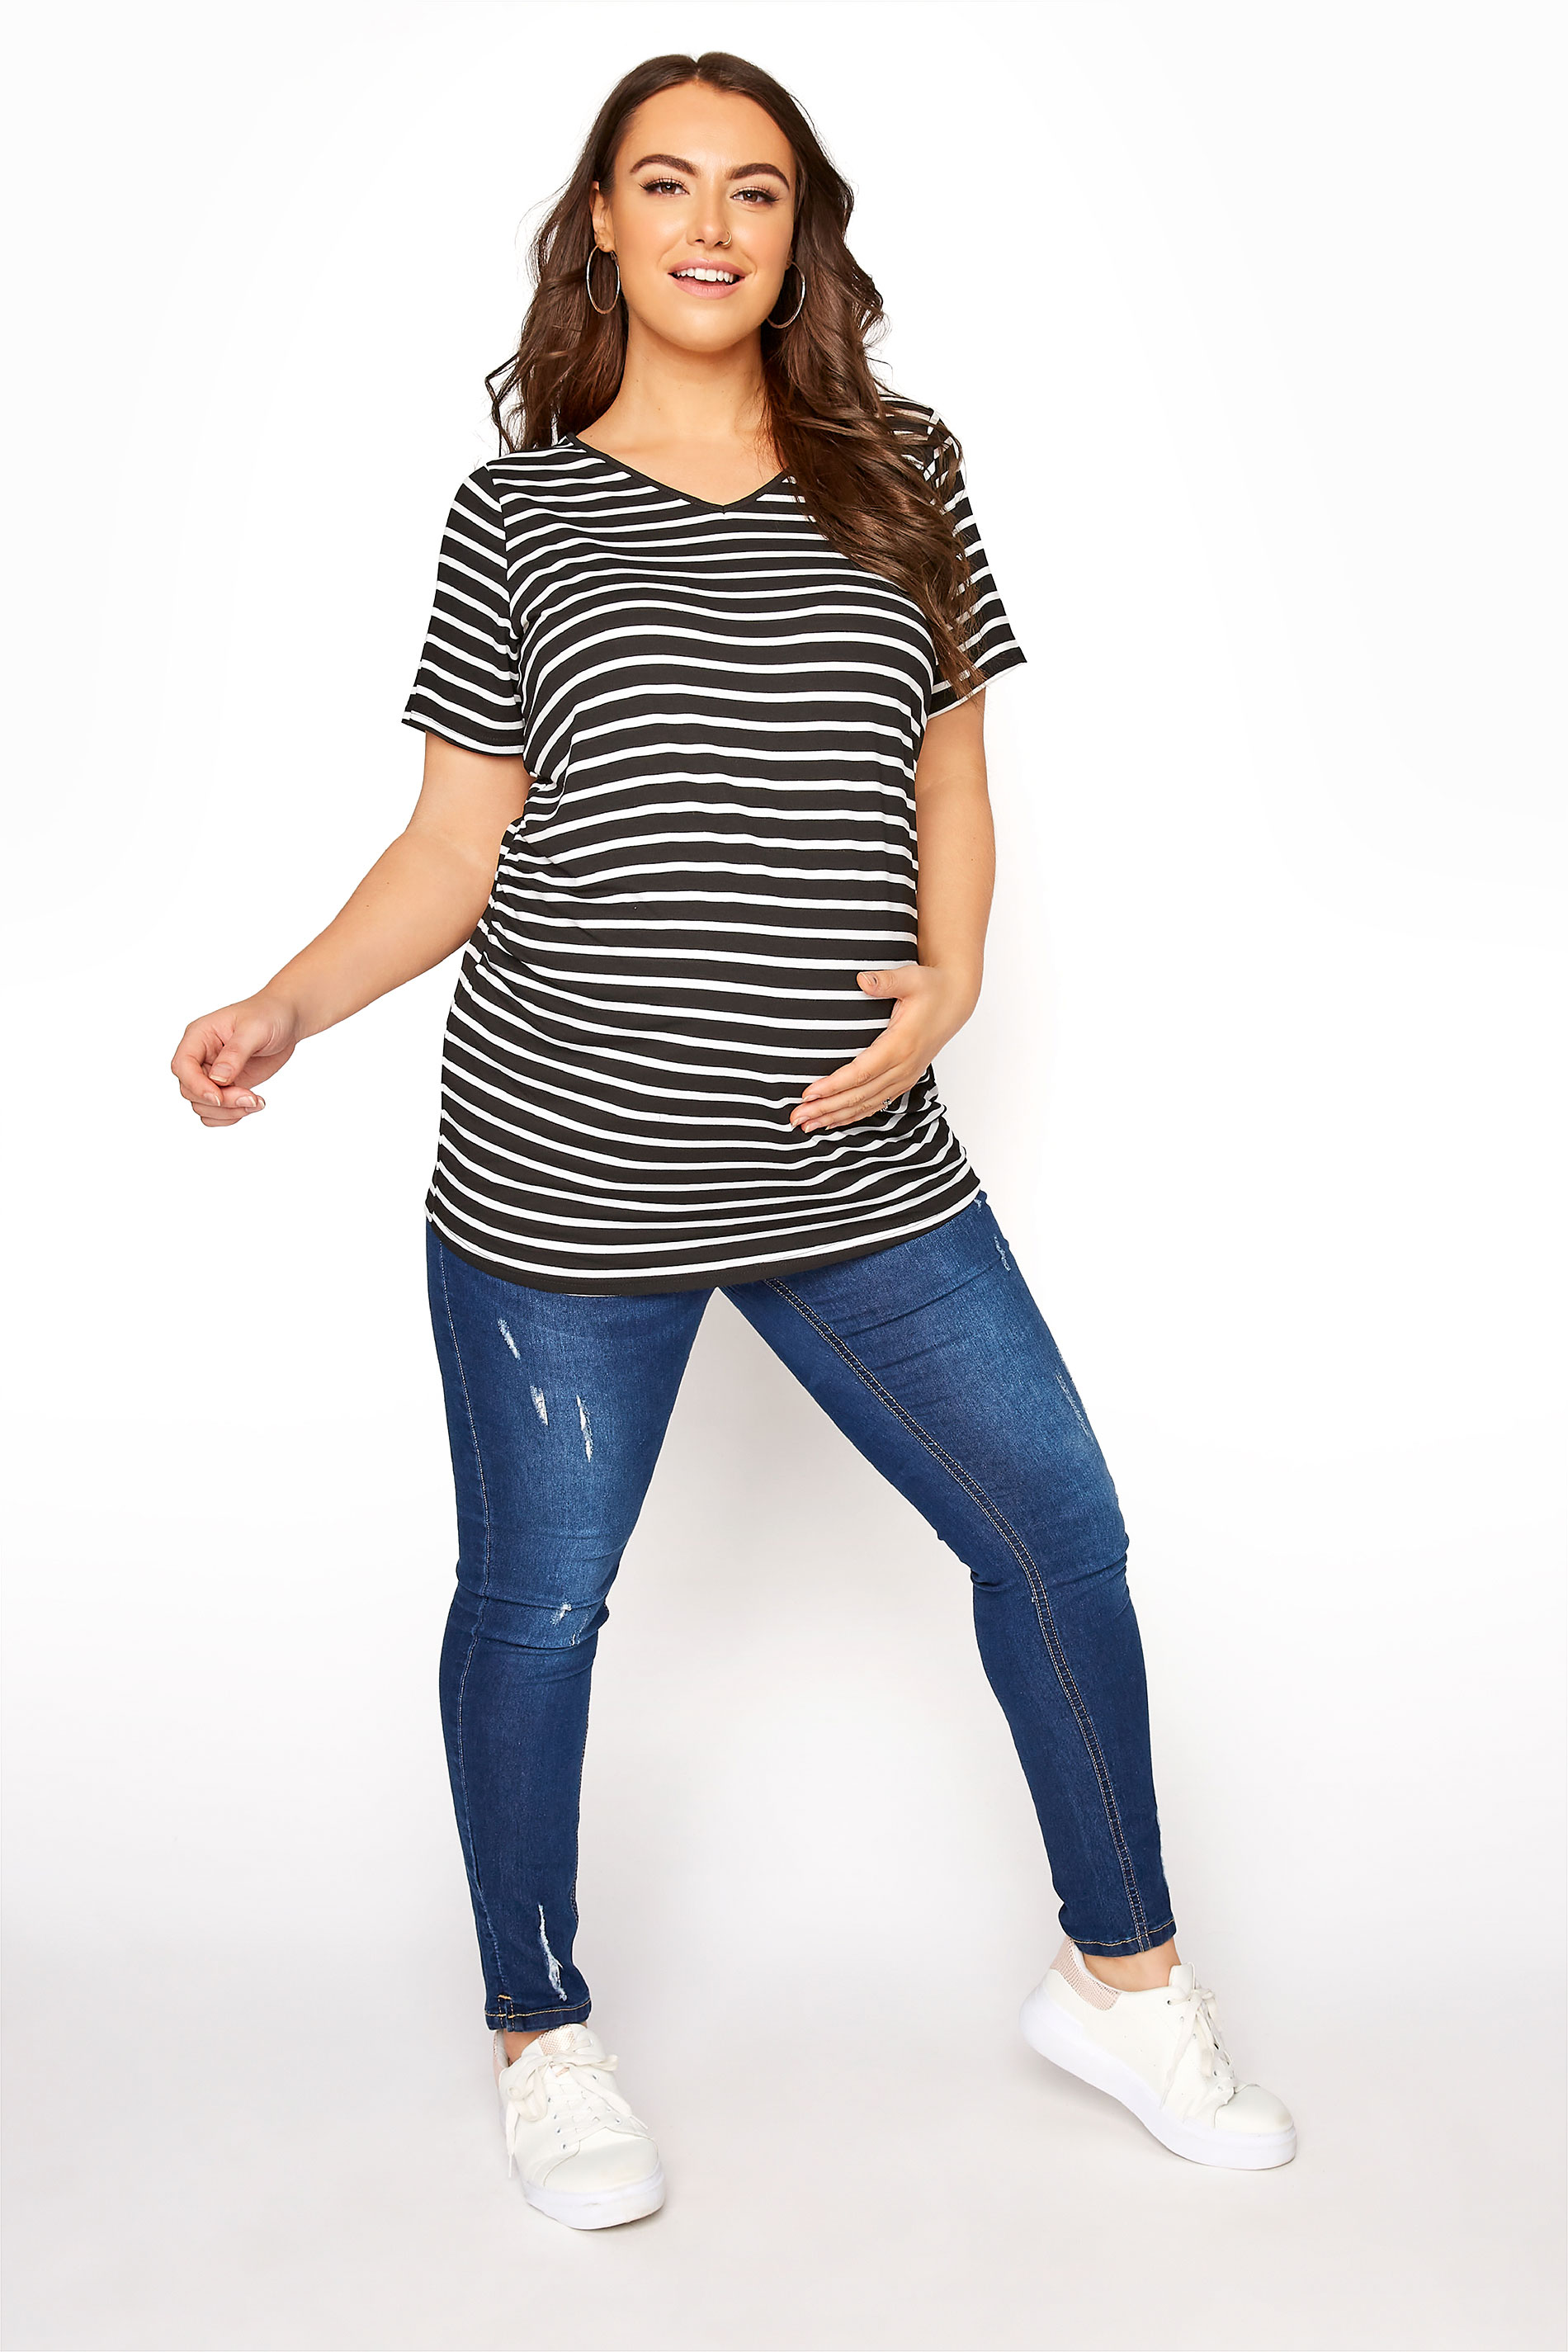 Grande taille  Tops Grande taille  T-Shirts | BUMP IT UP MATERNITY - T-Shirt Rayures Noires Manches Courtes - TD88705